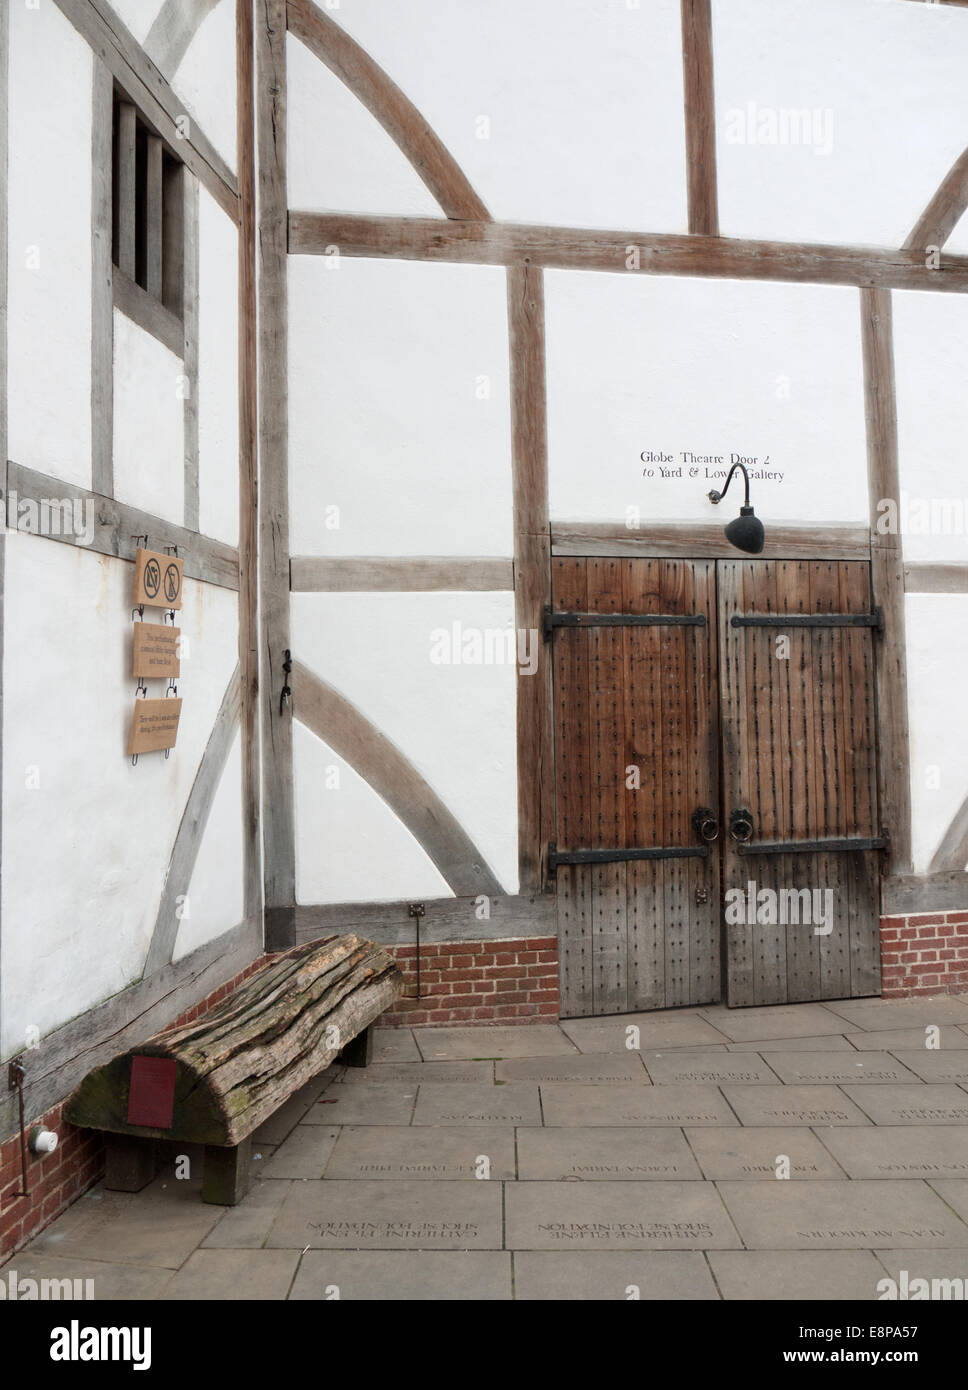 Shakespeare's Globe Theatre, London, UK Banque D'Images